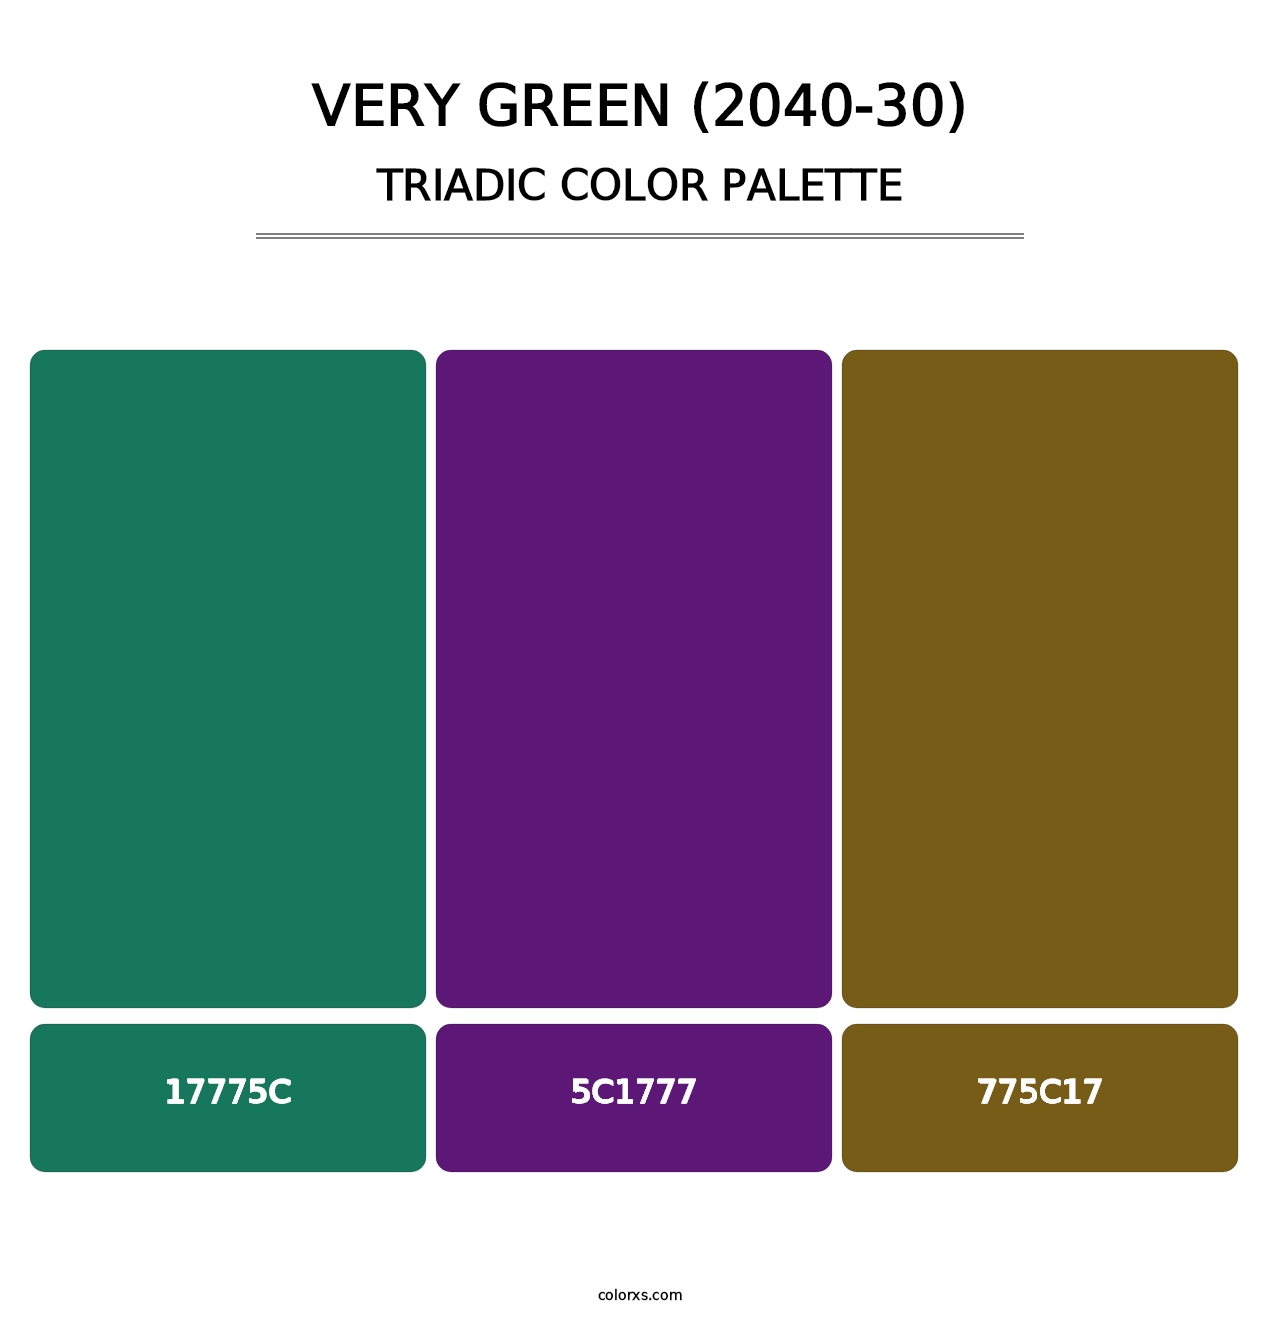 Very Green (2040-30) - Triadic Color Palette